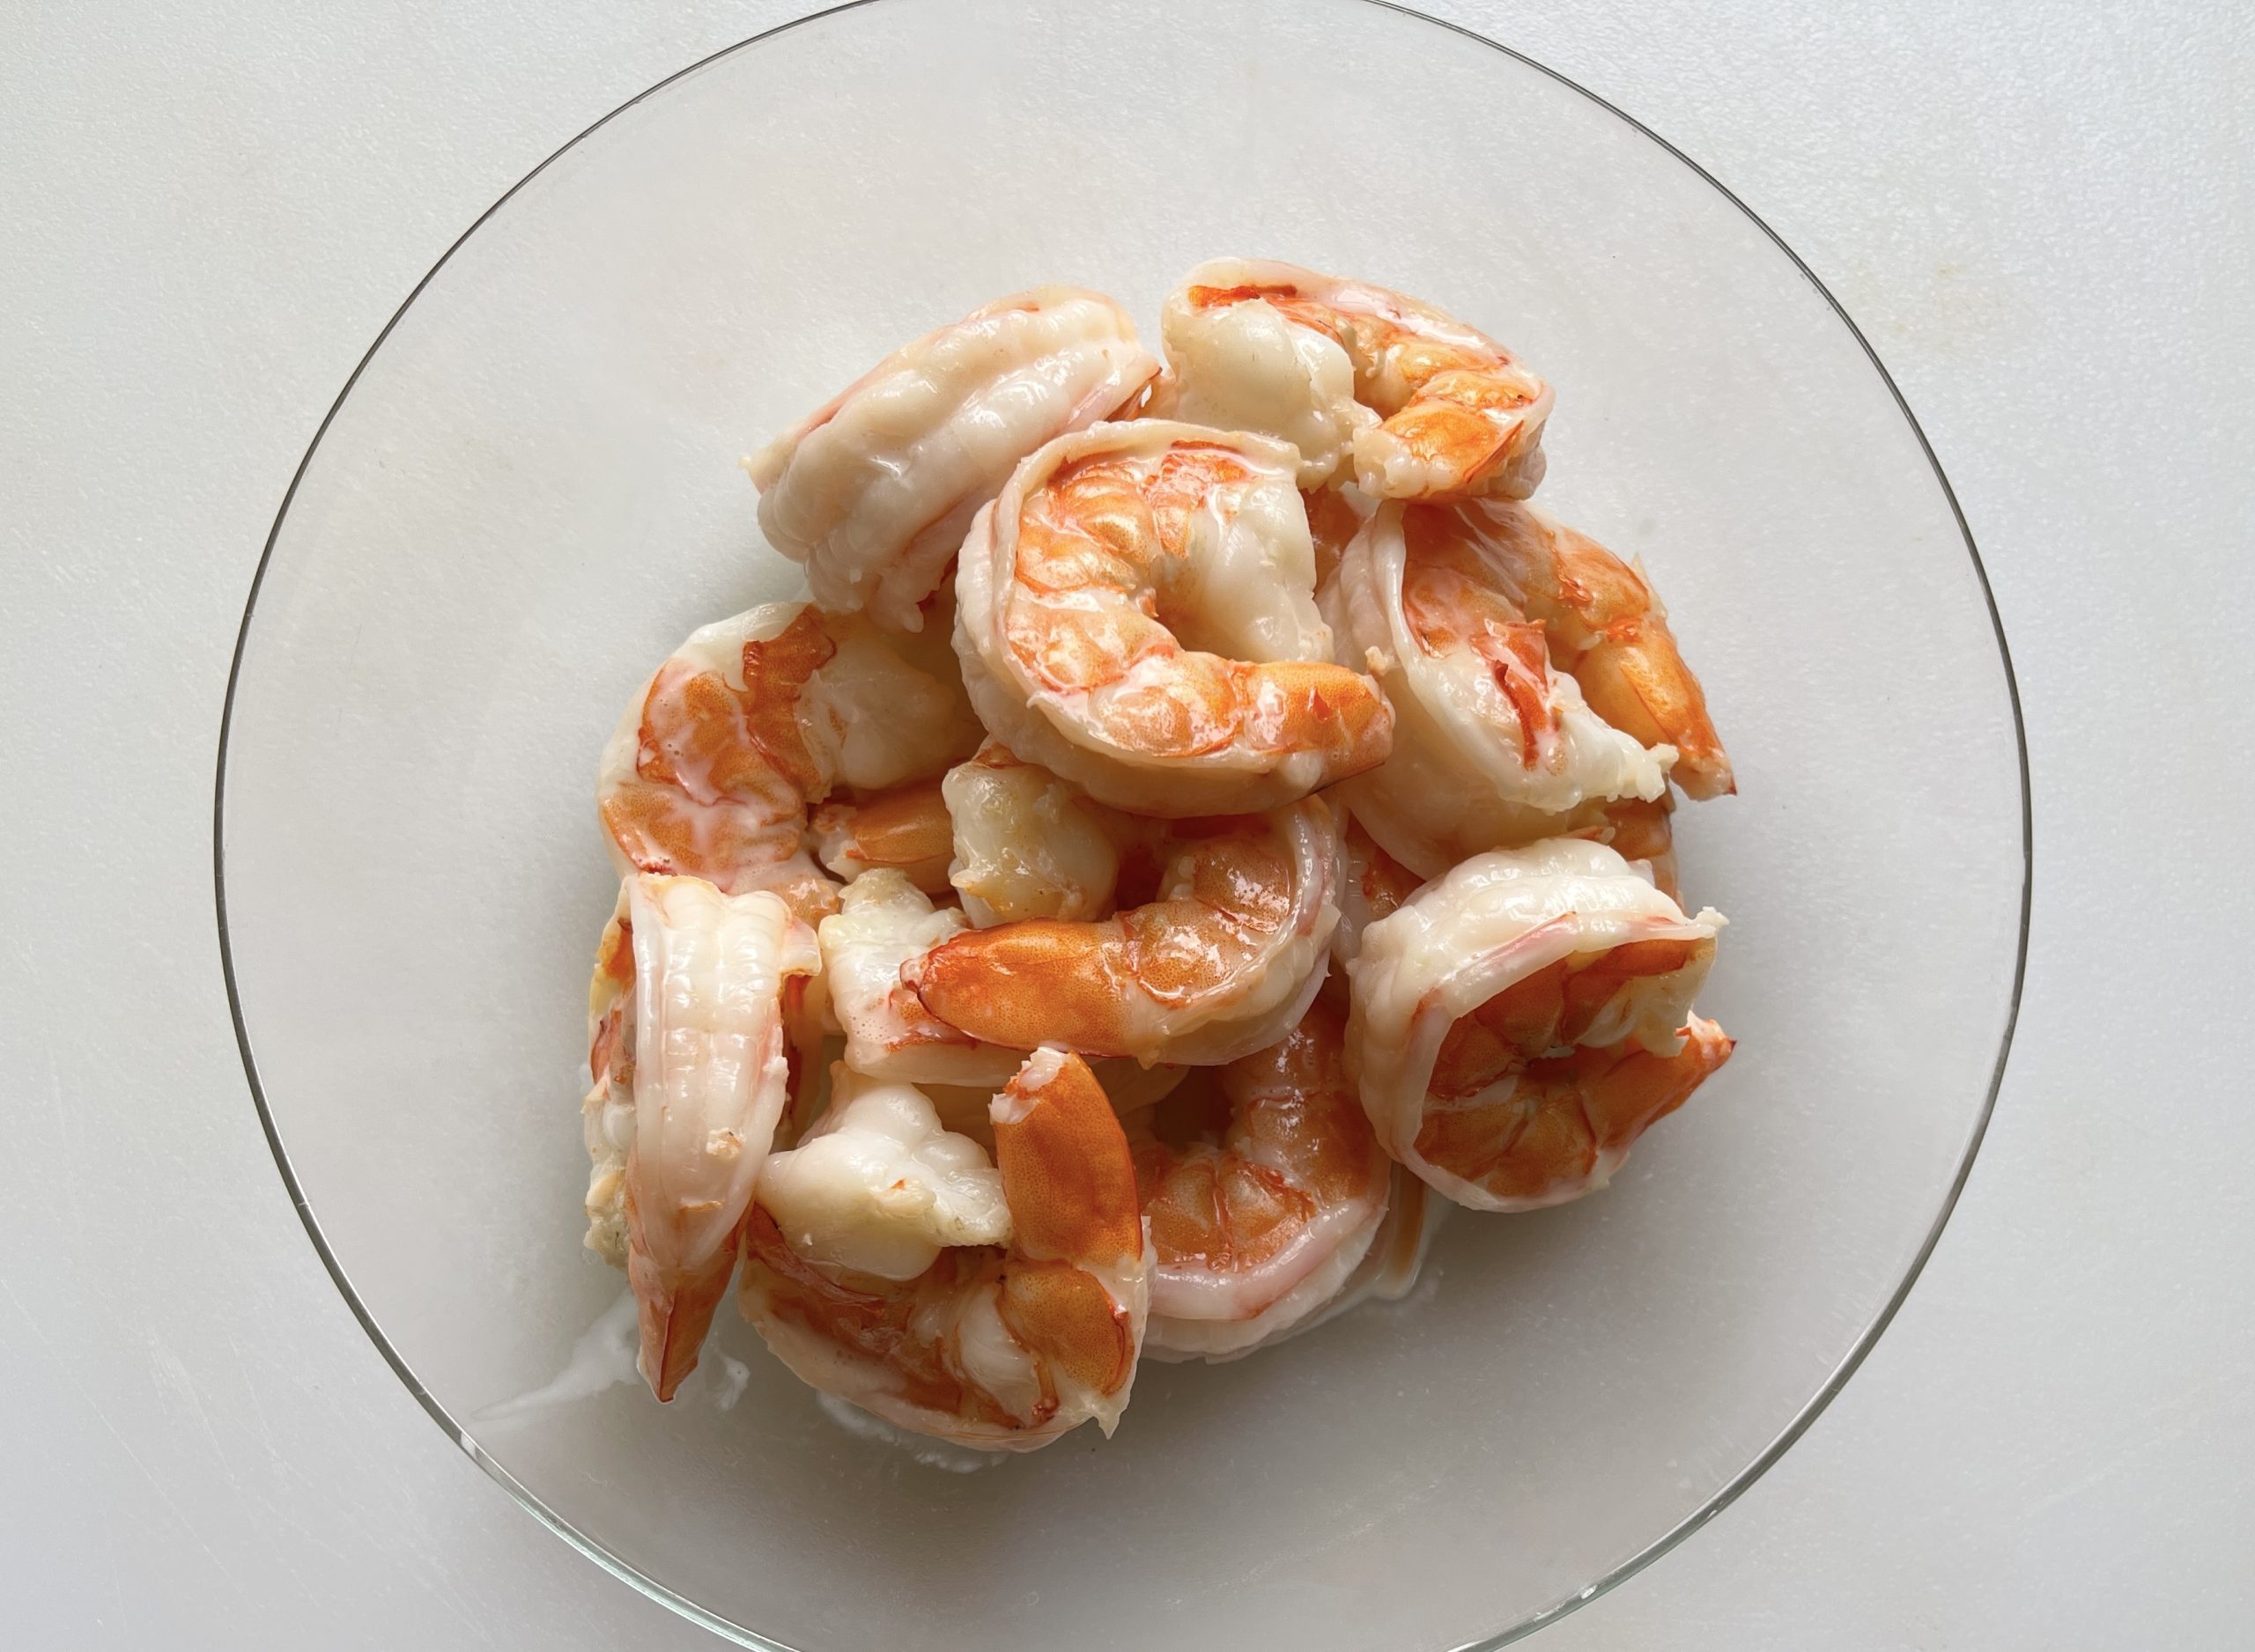 remove shrimp from the pan and allow to cool